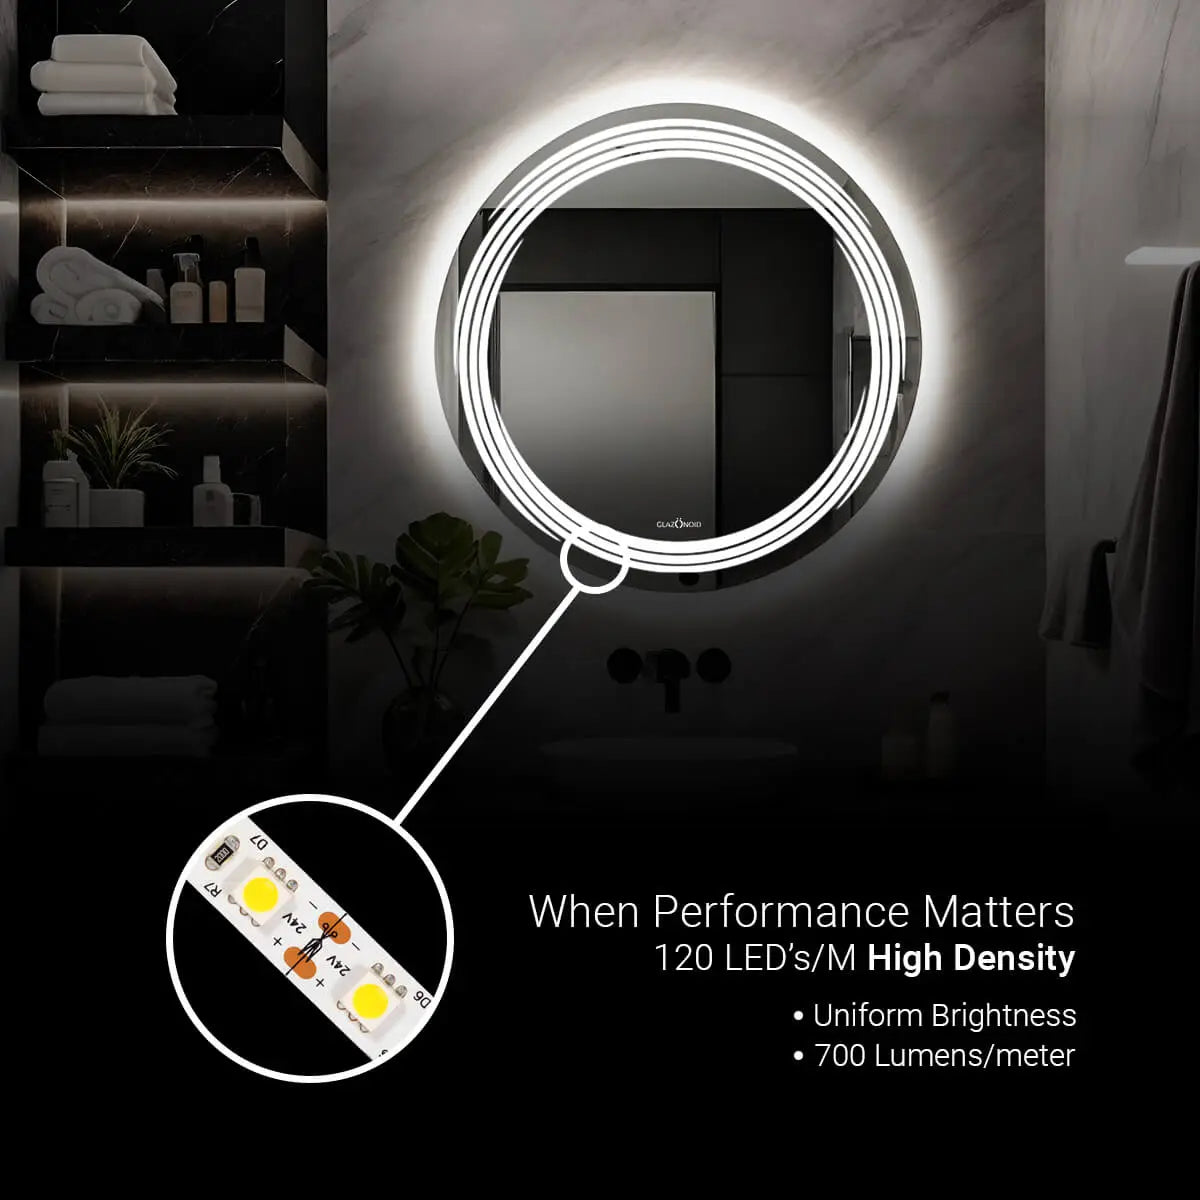 Round, illuminated bathroom mirror with a built-in bright white LED light. This mirror is perfect for shaving, applying makeup, or styling your hair. Text overlay says "When Performance Matters. 120 LEDs/M High Density. Uniform Brightness. 700 Lumens/meter."